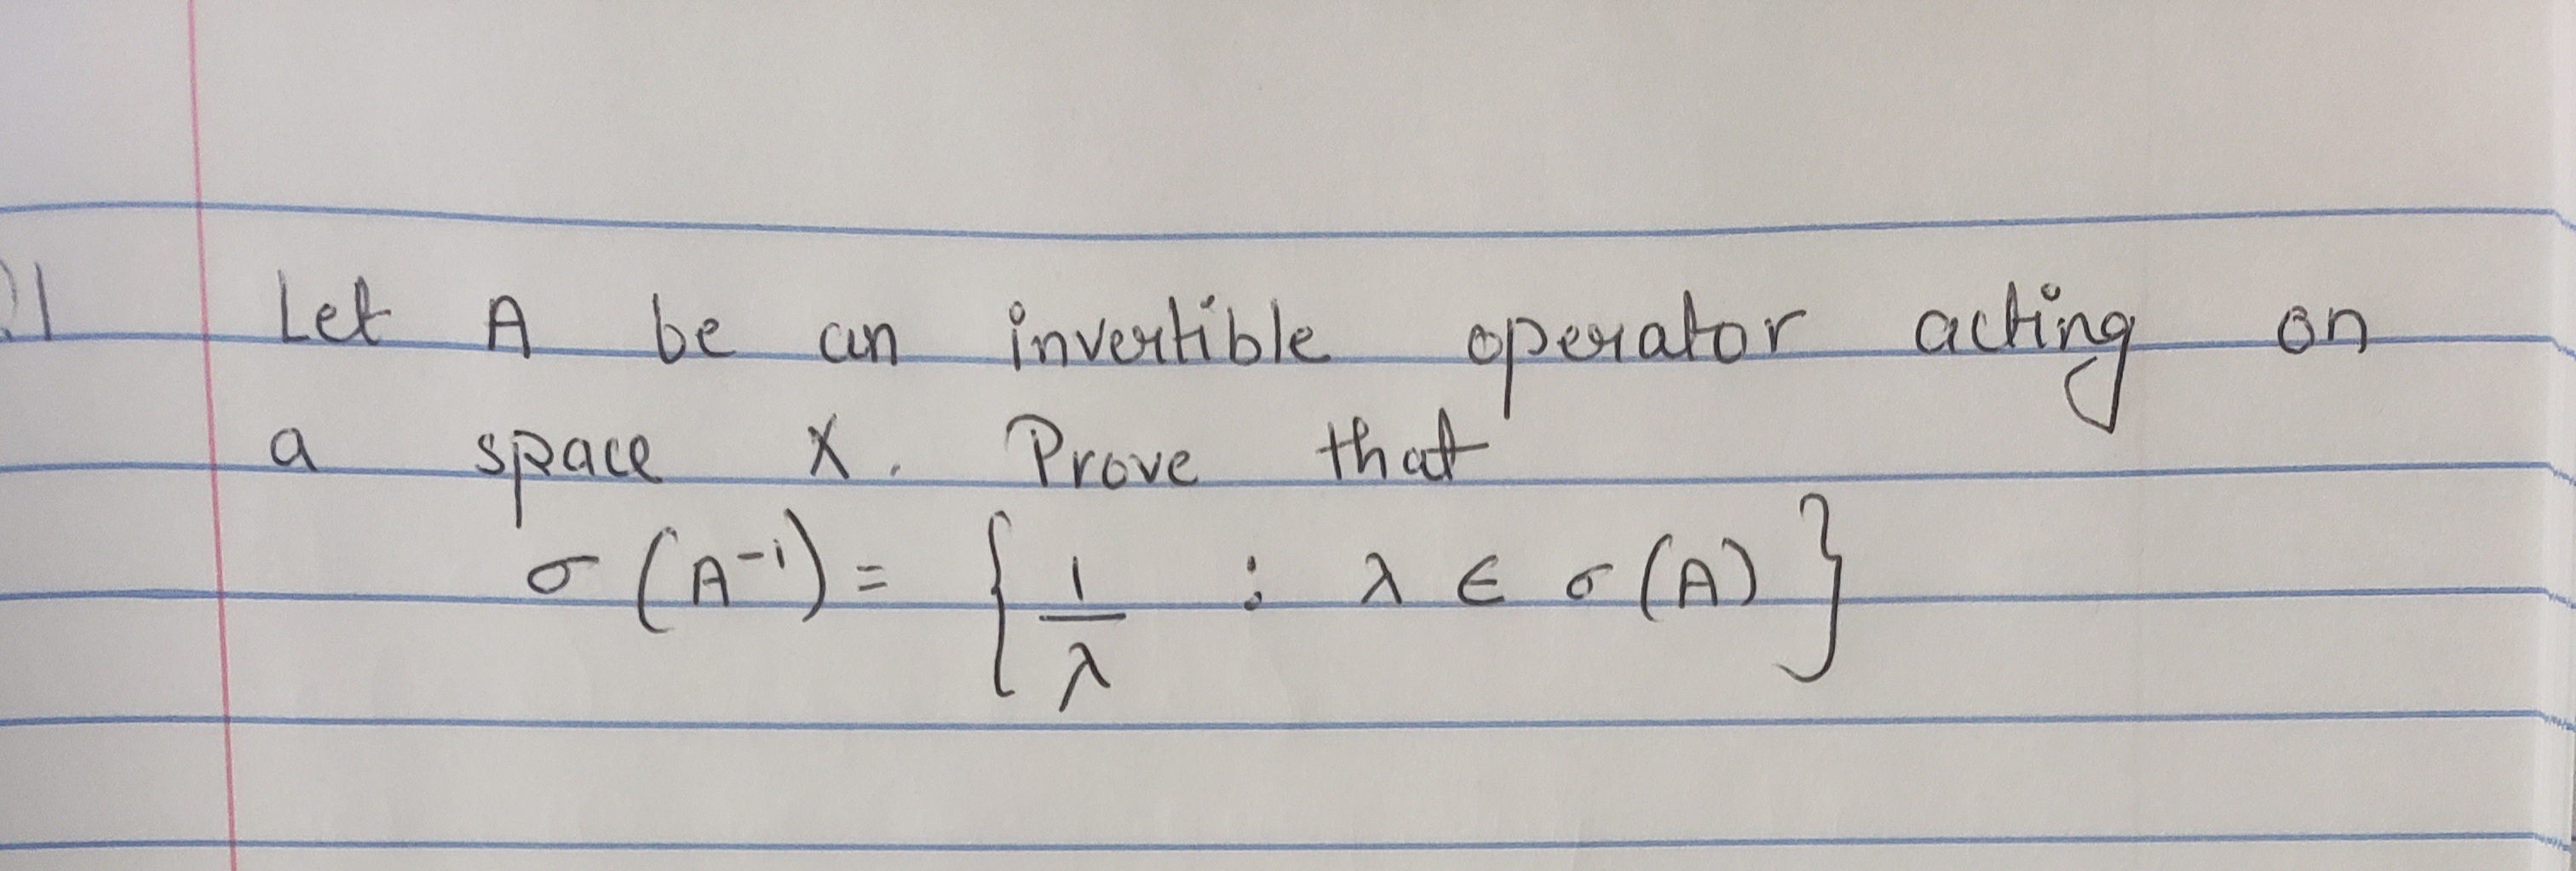 Let A
invertible operator aching
X. Prove.
be cun
on
that
space
(A-)=
AEo(A)
